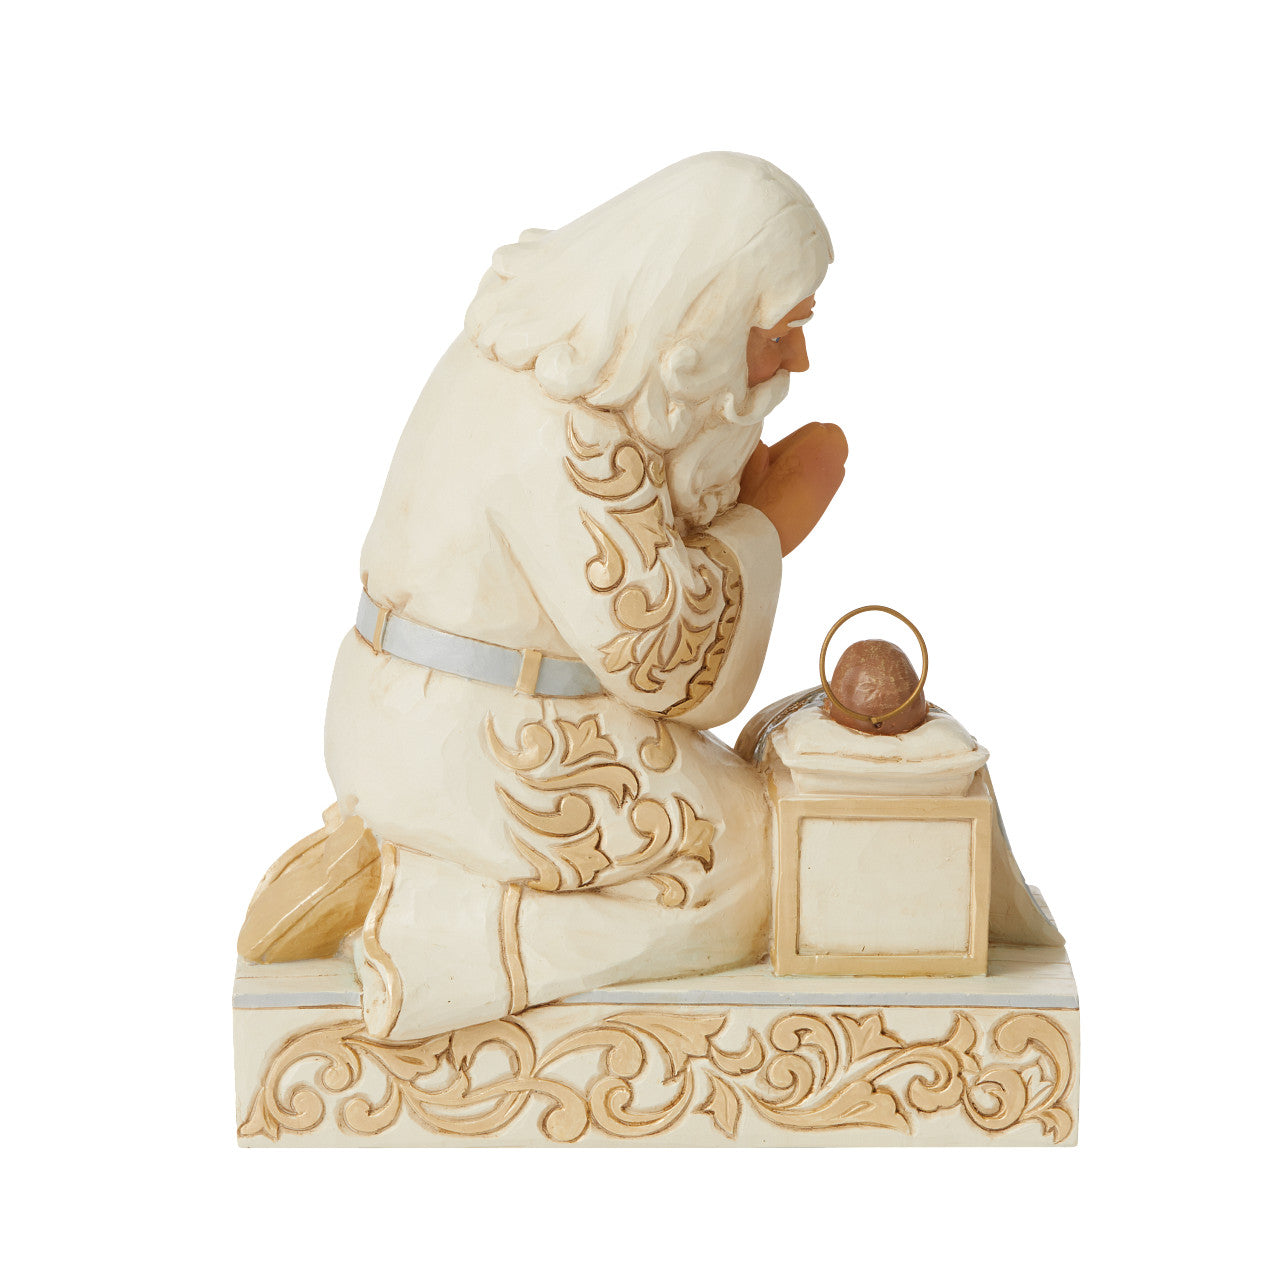 Kneeling Before a King - Holiday Lustre Santa With Baby Jesus Figurine